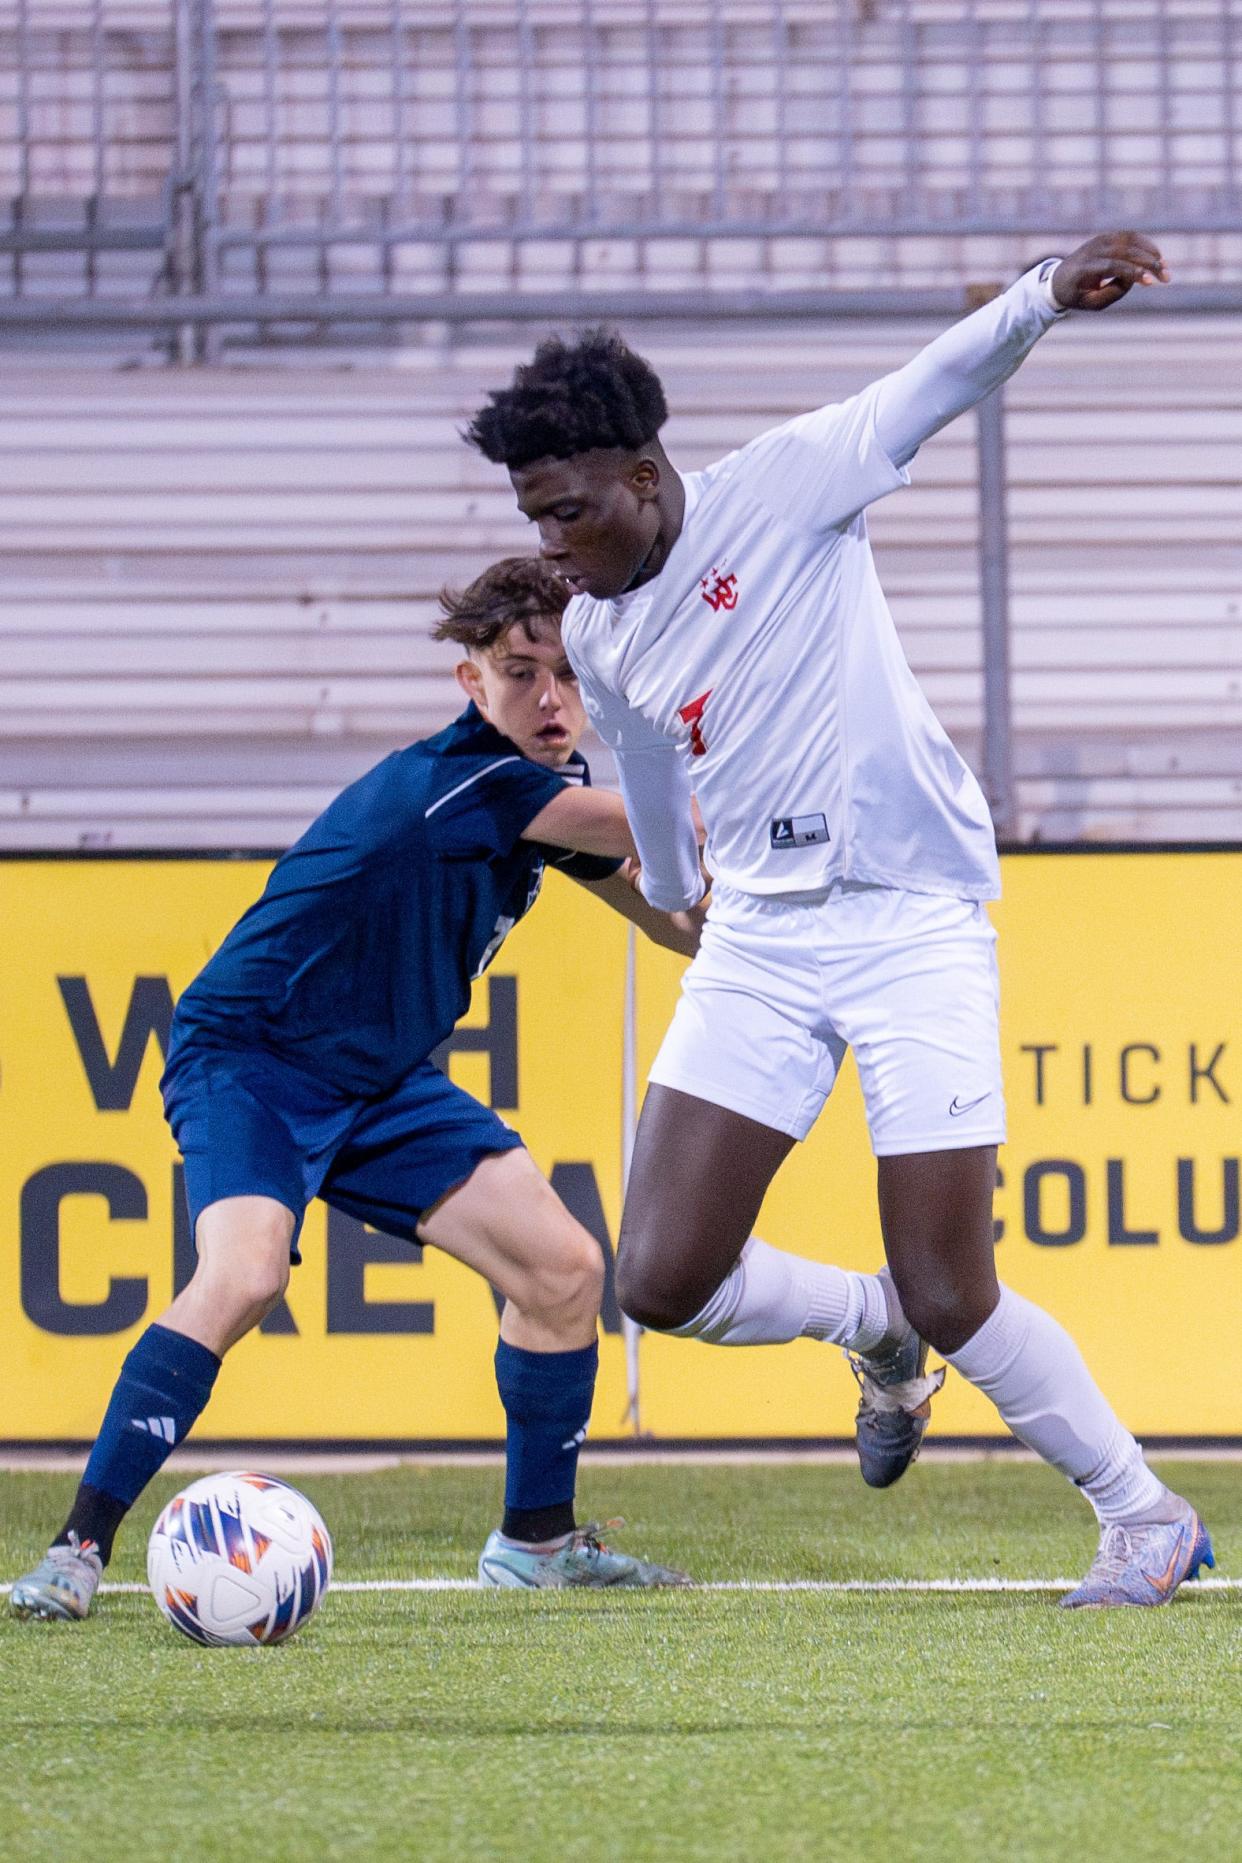 Worthington Christian's Sammy Owusu-Sarfo was named state Player of the Year for Division III boys soccer.